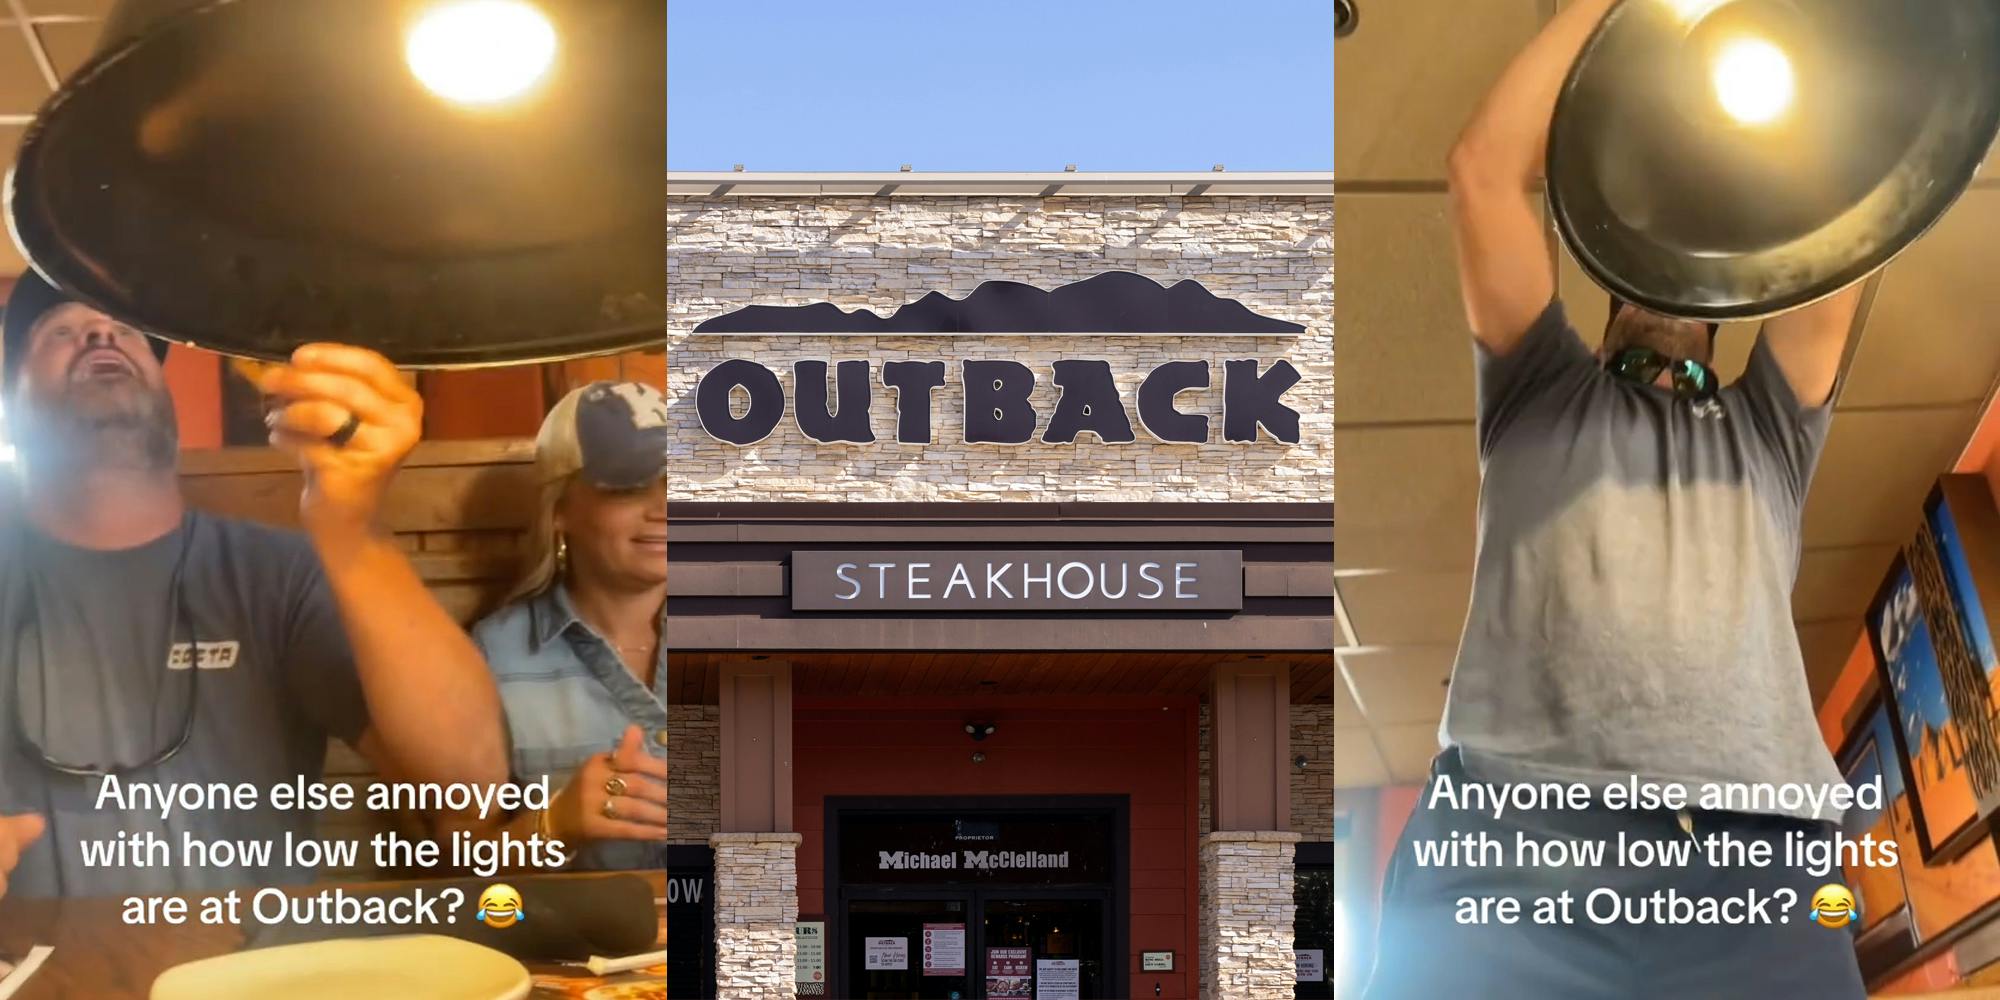 Outback Steakhouse customers at table with light with caption "Anyone else annoyed with how low the lights are at Outback?" (l) Outback Steakhouse building with sign (c) Outback Steakhouse customer at table adjusting light with caption "Anyone else annoyed with how low the lights are at Outback?" (r)